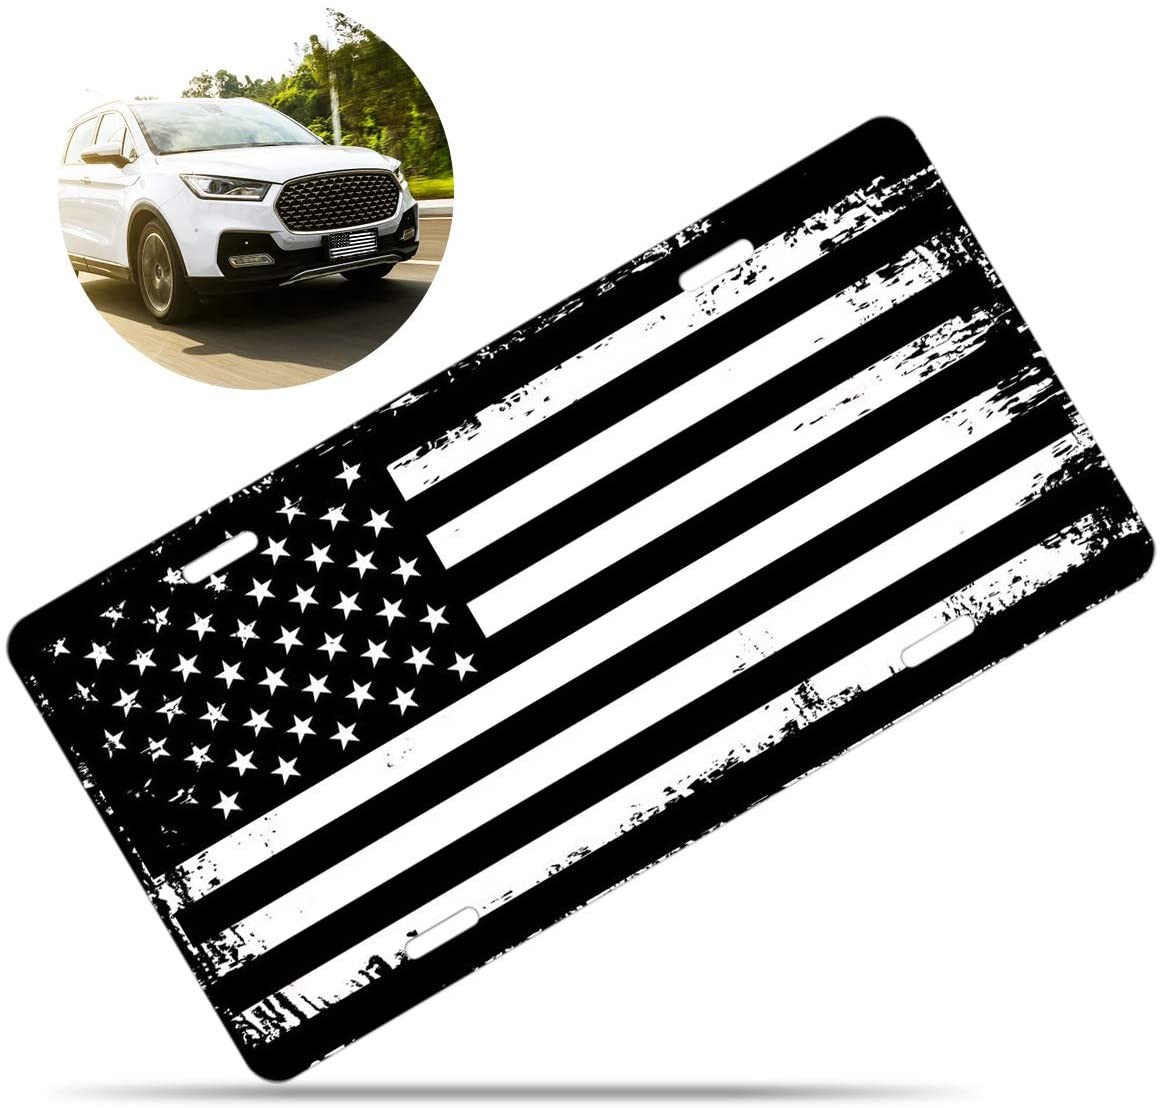 Zone Tech Tactical USA Flag License Plate - Black and White Grunge Premium Quality Thick Durable Novelty American Patriotic Pledge of Allegiance